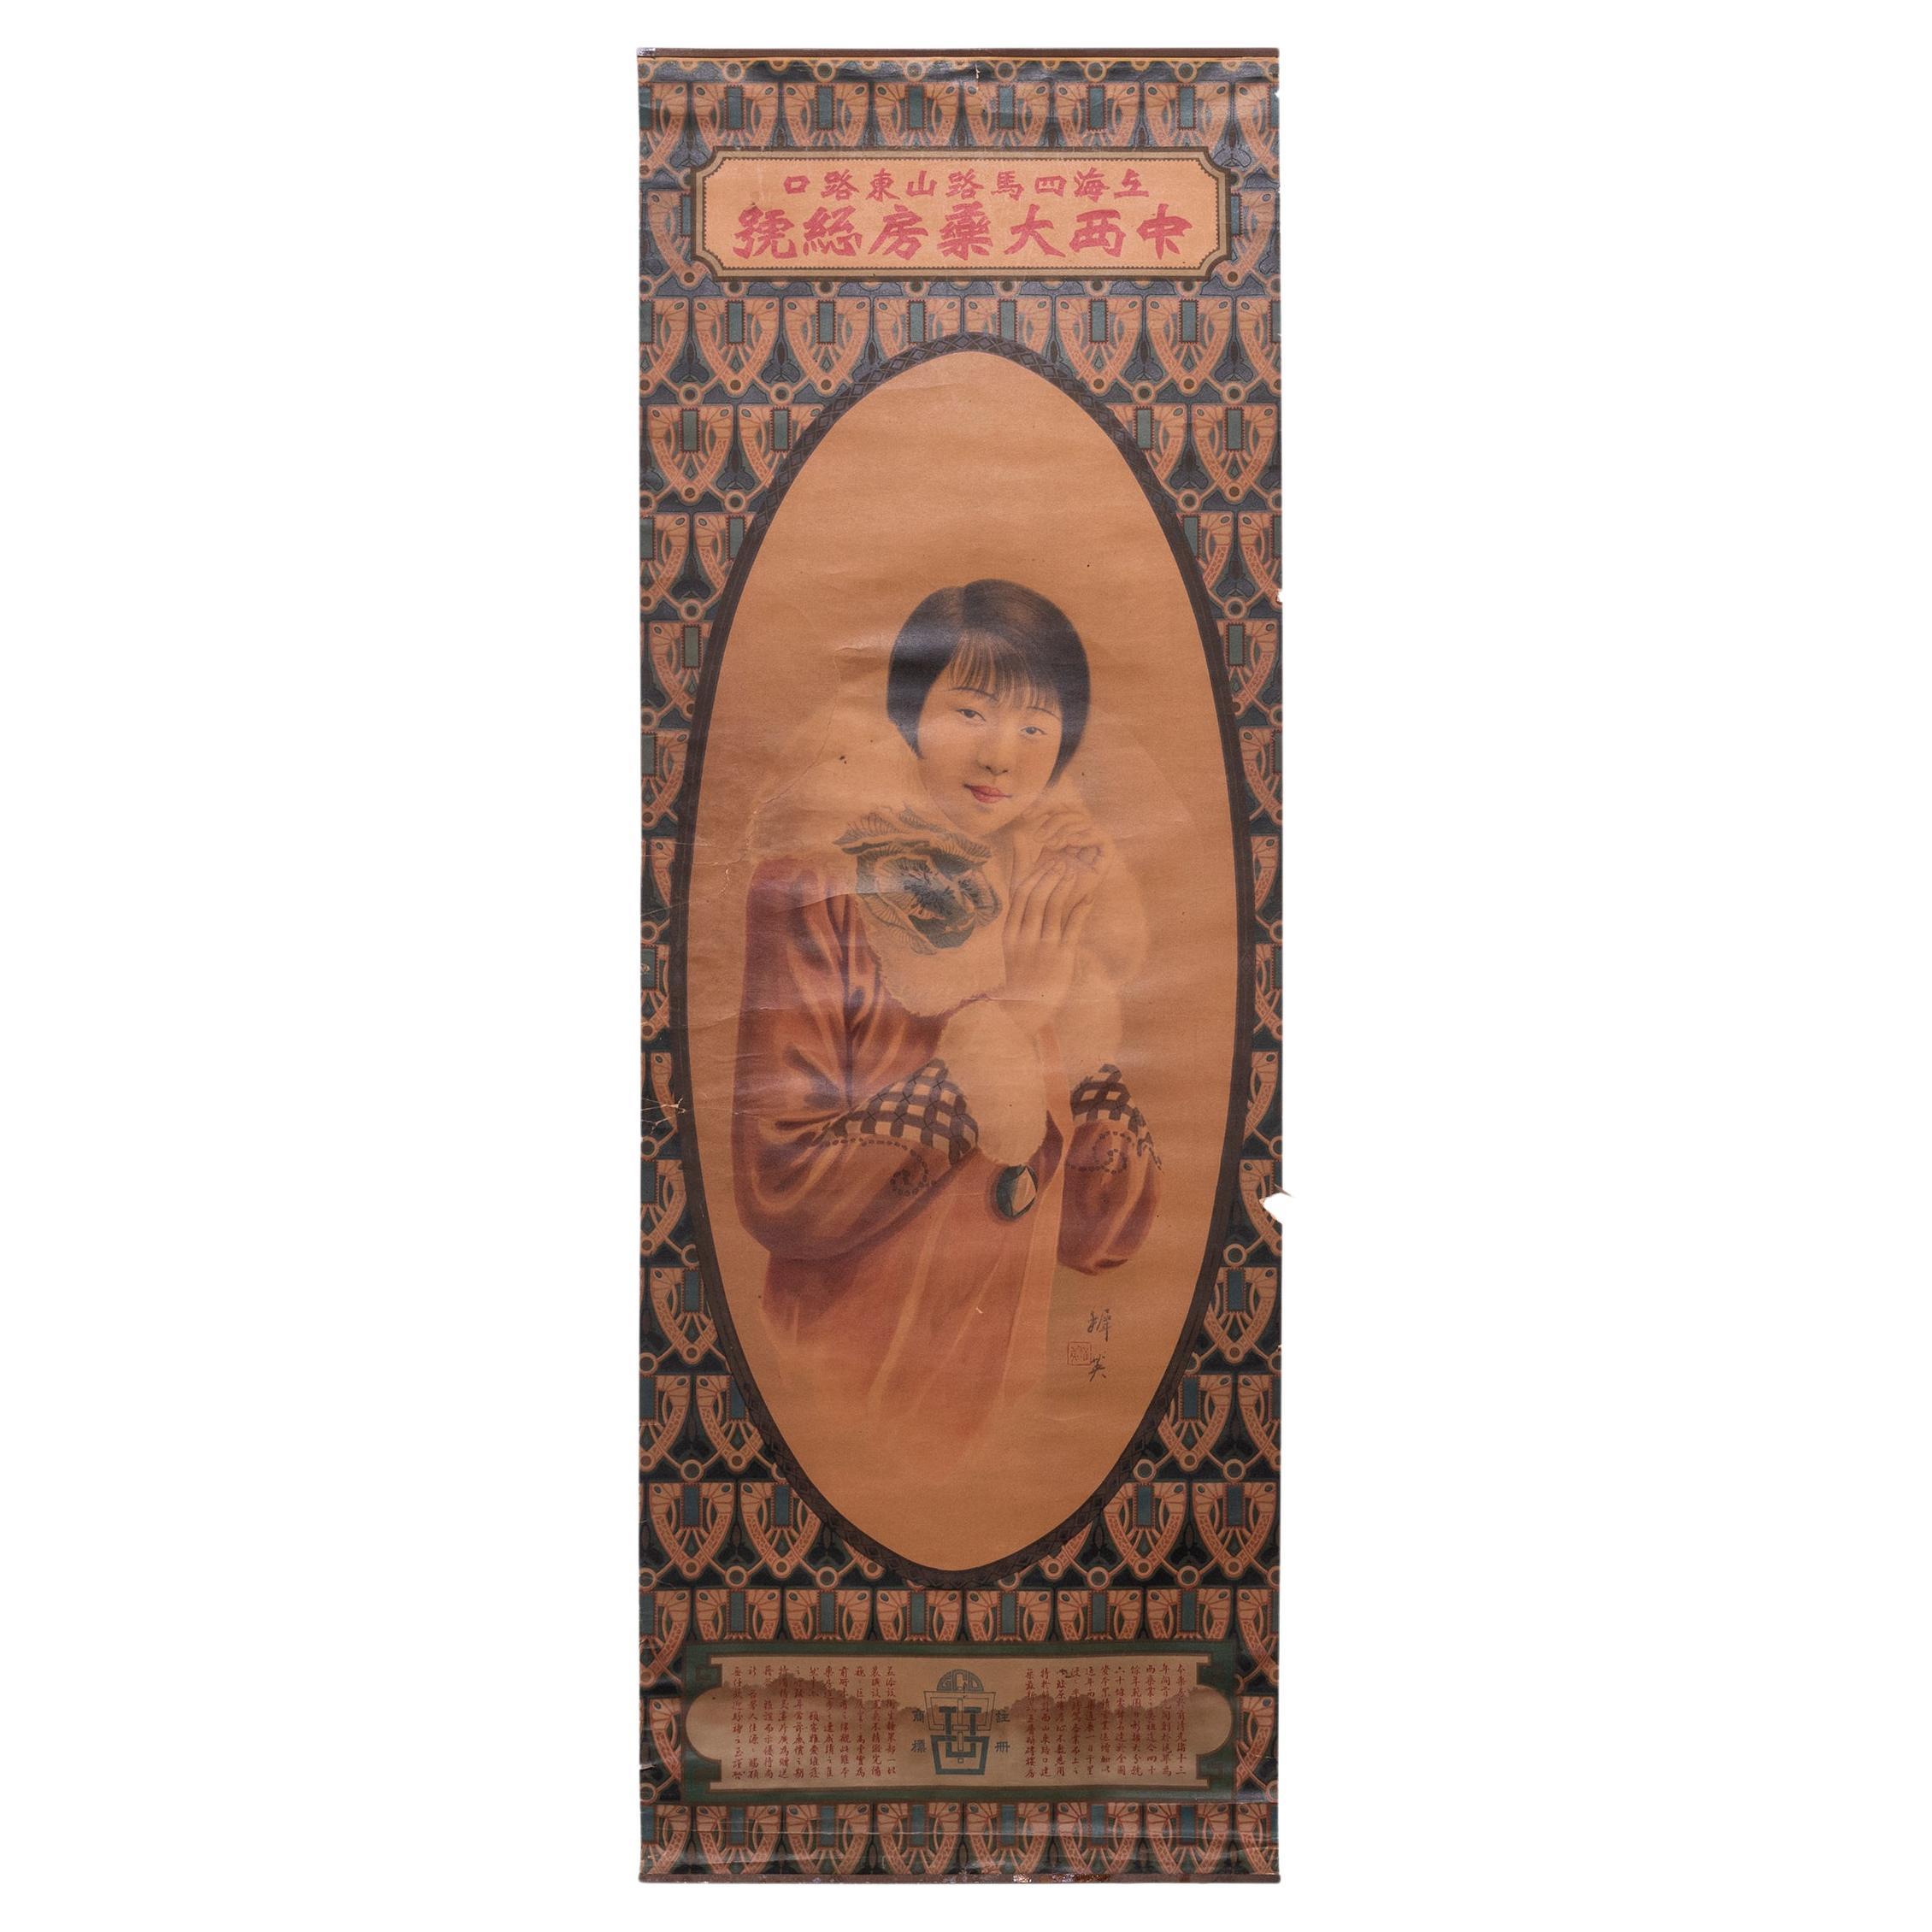 Vintage Chinese Deco Medicine Pharmacy Advertisement Poster, c. 1920 For Sale